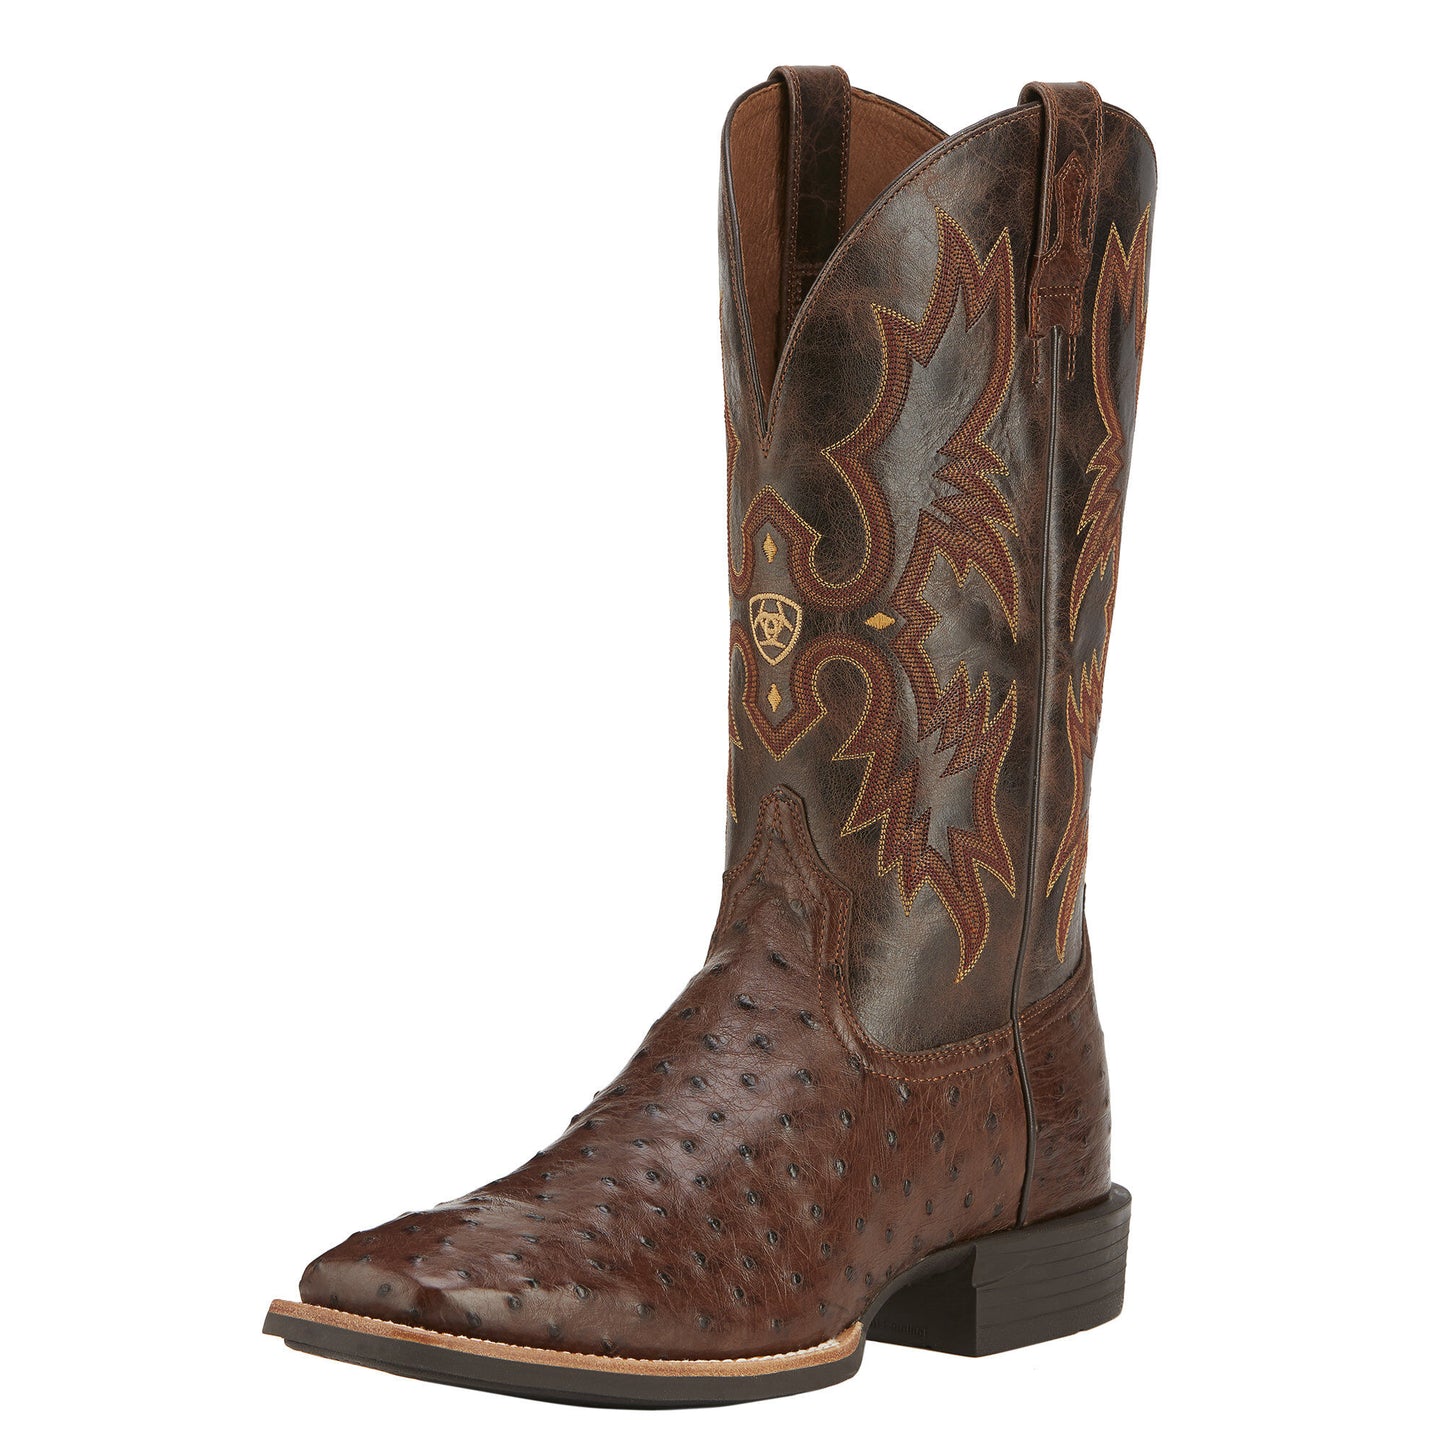 Ariat Men's Quantum Classic Boot - Antique Tabac Full Quill Ostrich - French's Boots